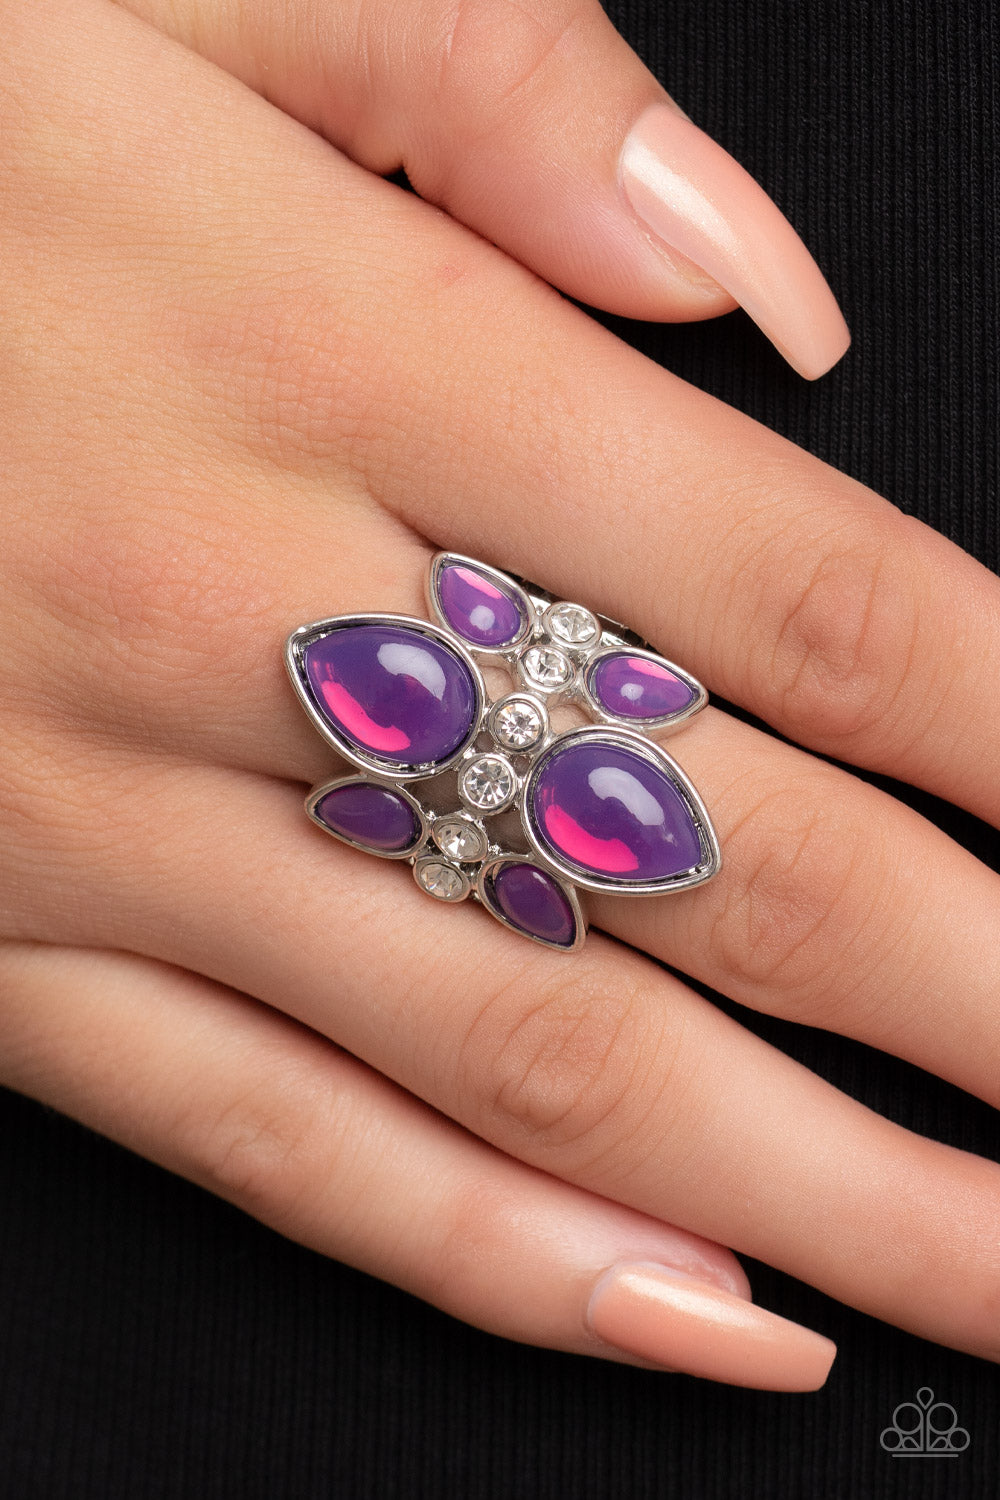 TRIO Tinto Purple Ring - Paparazzi Accessories  Crowns of glassy purple teardrop beads fan out from a center of glassy white rhinestones, coalescing into an ethereal centerpiece atop the finger. Features a stretchy band for a flexible fit.  Sold as one individual ring.